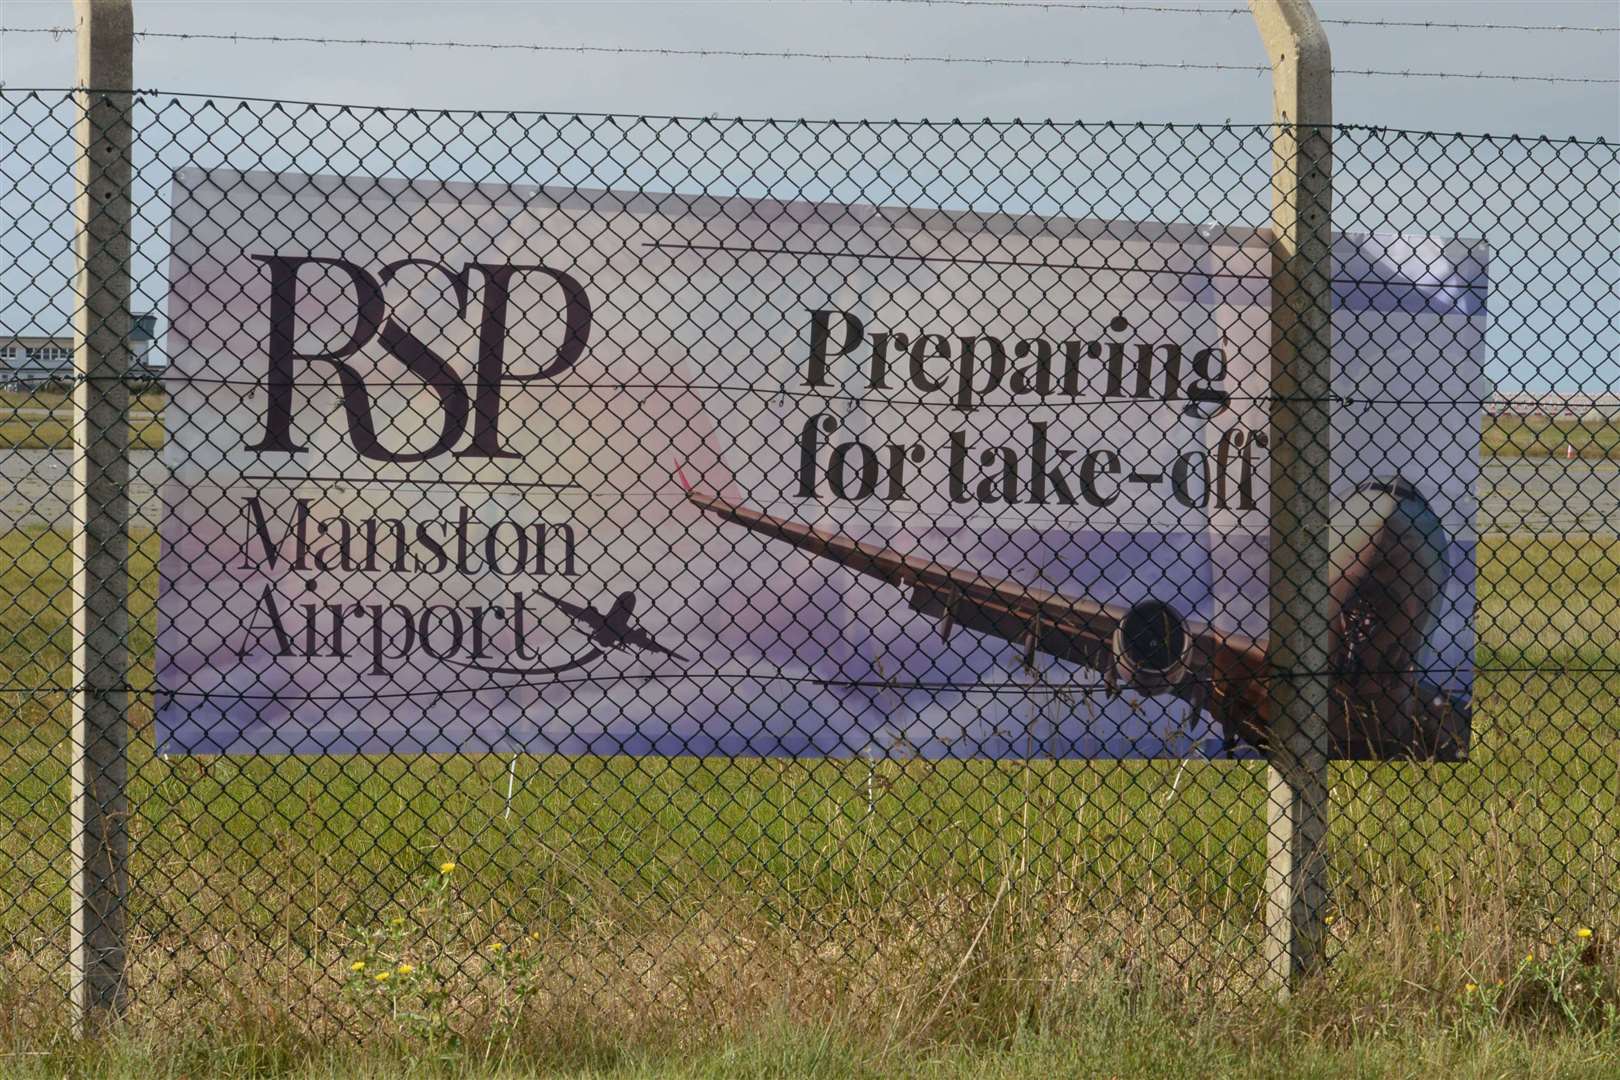 RSP has been planning take-off for many years...but will it ever happen? Picture: Chris Davey.